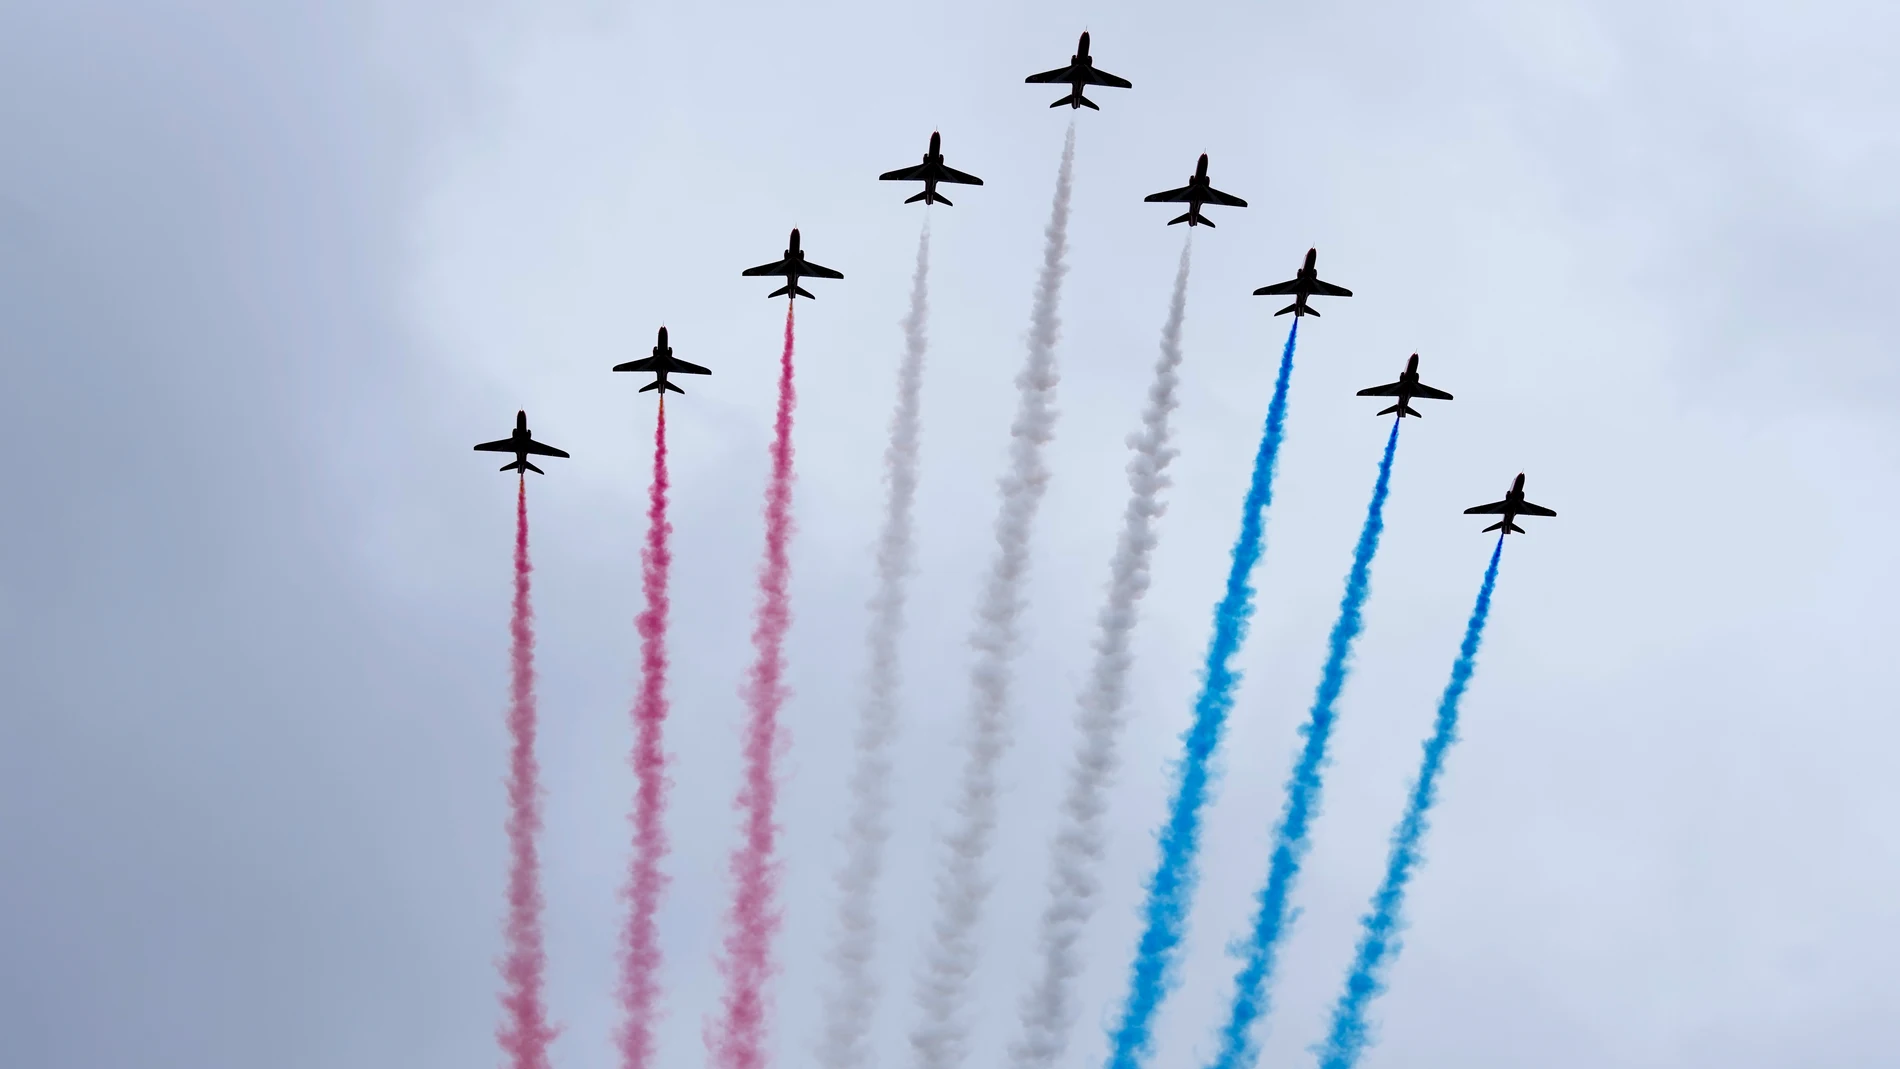 The Red Arrows fly over Buckingham Palace as members of the royal family stand on the balcony after the coronation of Britain's King Charles III in London, Saturday, May 6, 2023. (AP Photo/Peter Dejong, Pool)